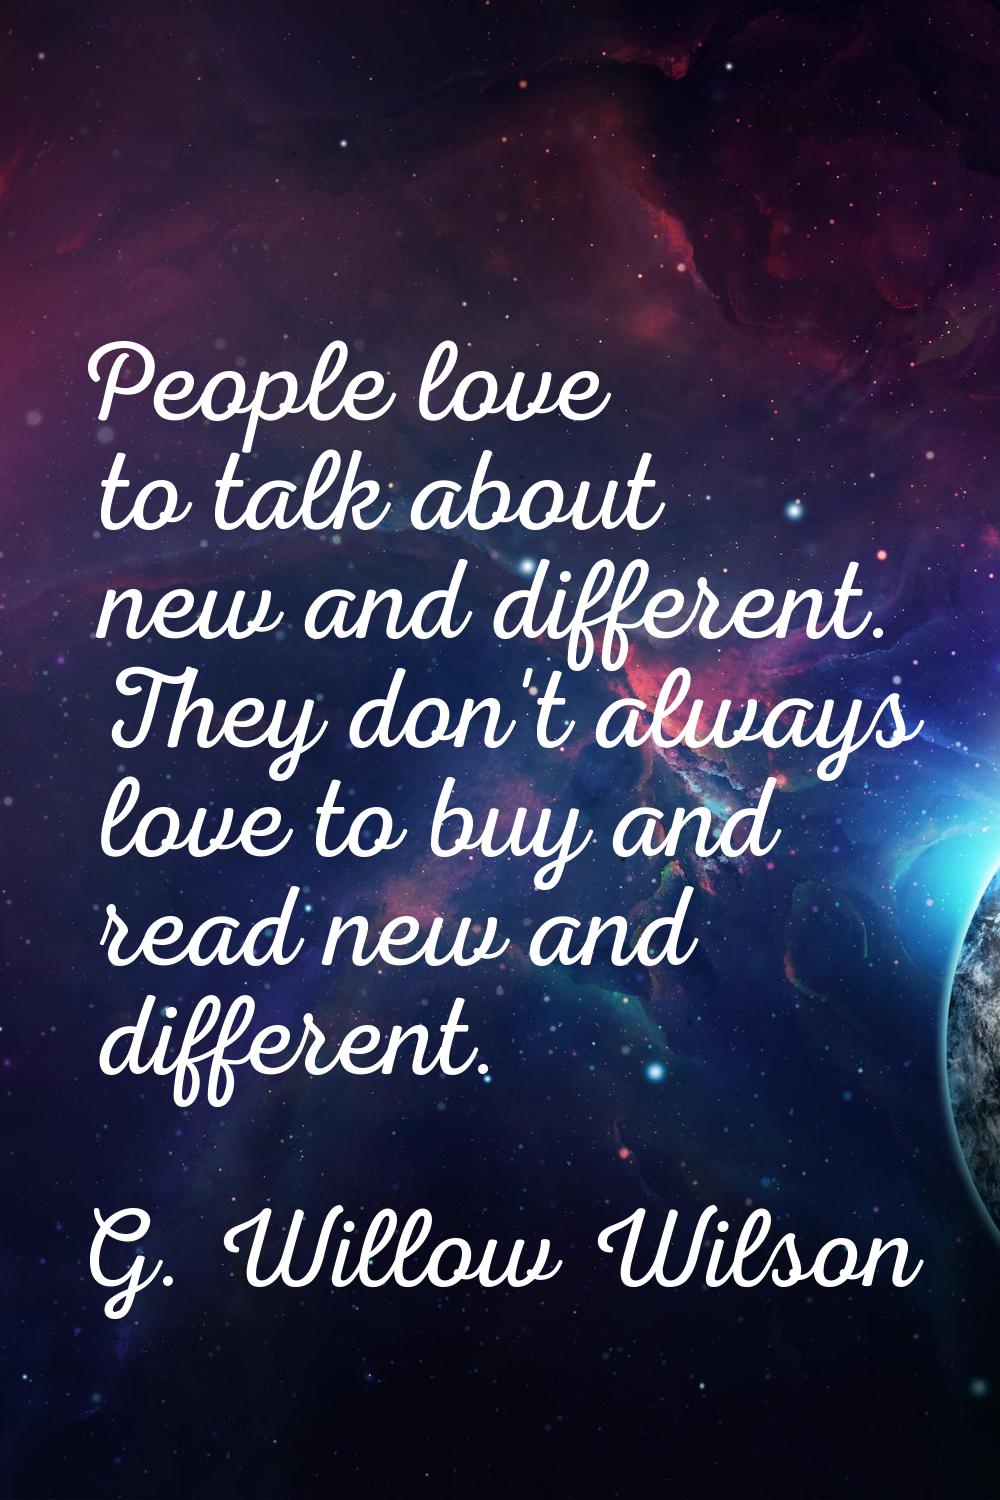 People love to talk about new and different. They don't always love to buy and read new and differe